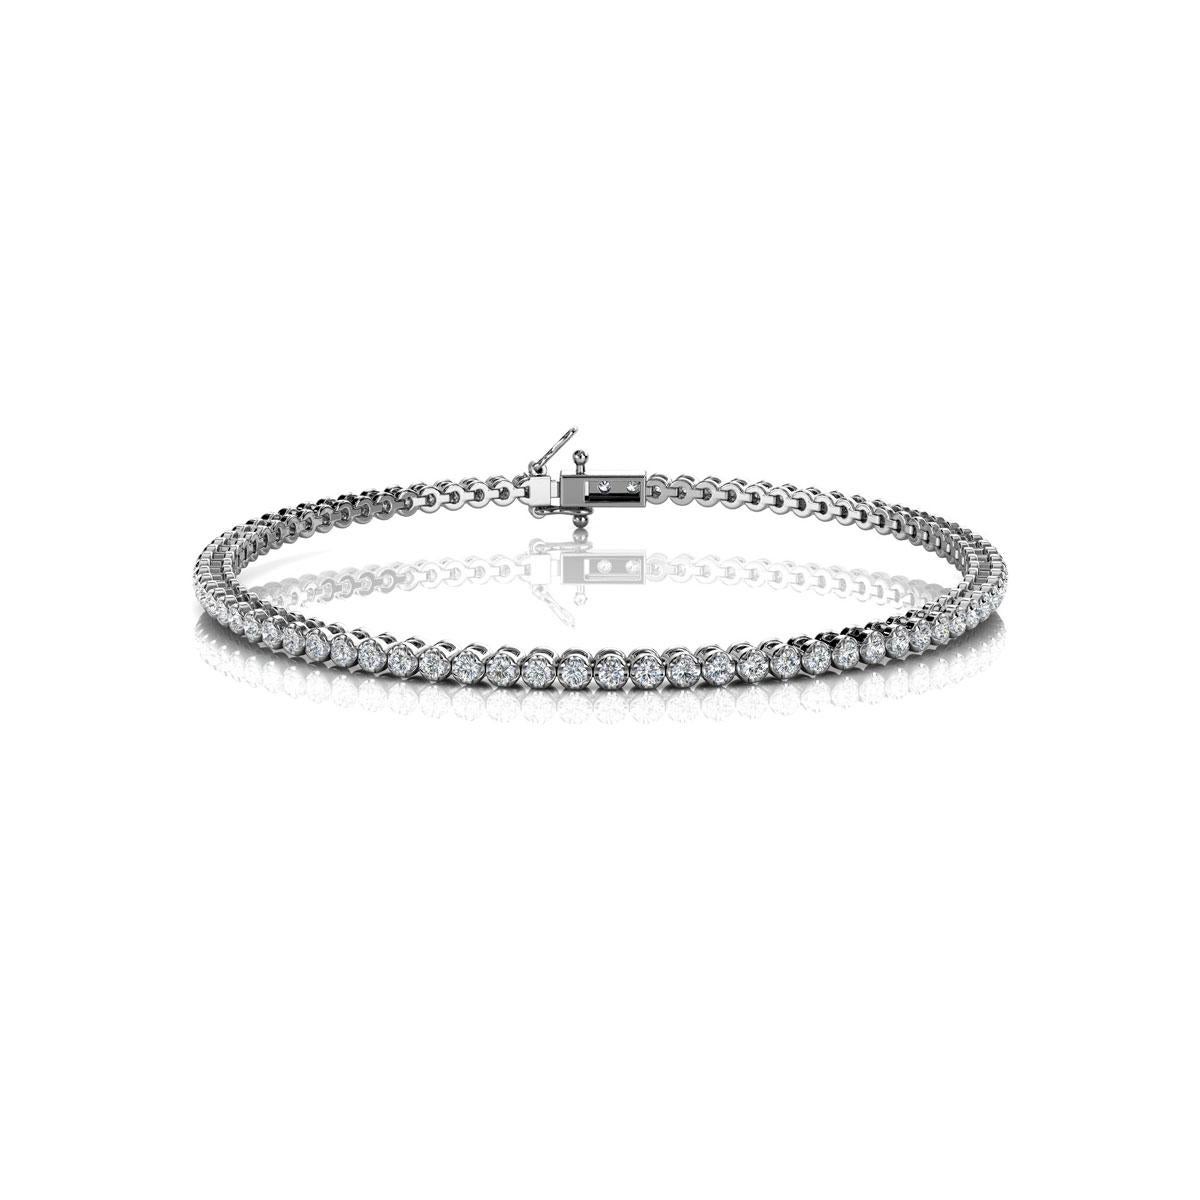 A timeless four prongs diamonds tennis bracelet. Experience the Difference!

Product details: 

Center Gemstone Type: NATURAL DIAMOND
Center Gemstone Color: WHITE
Center Gemstone Shape: ROUND
Center Diamond Carat Weight: 0.97
Metal: 14K White